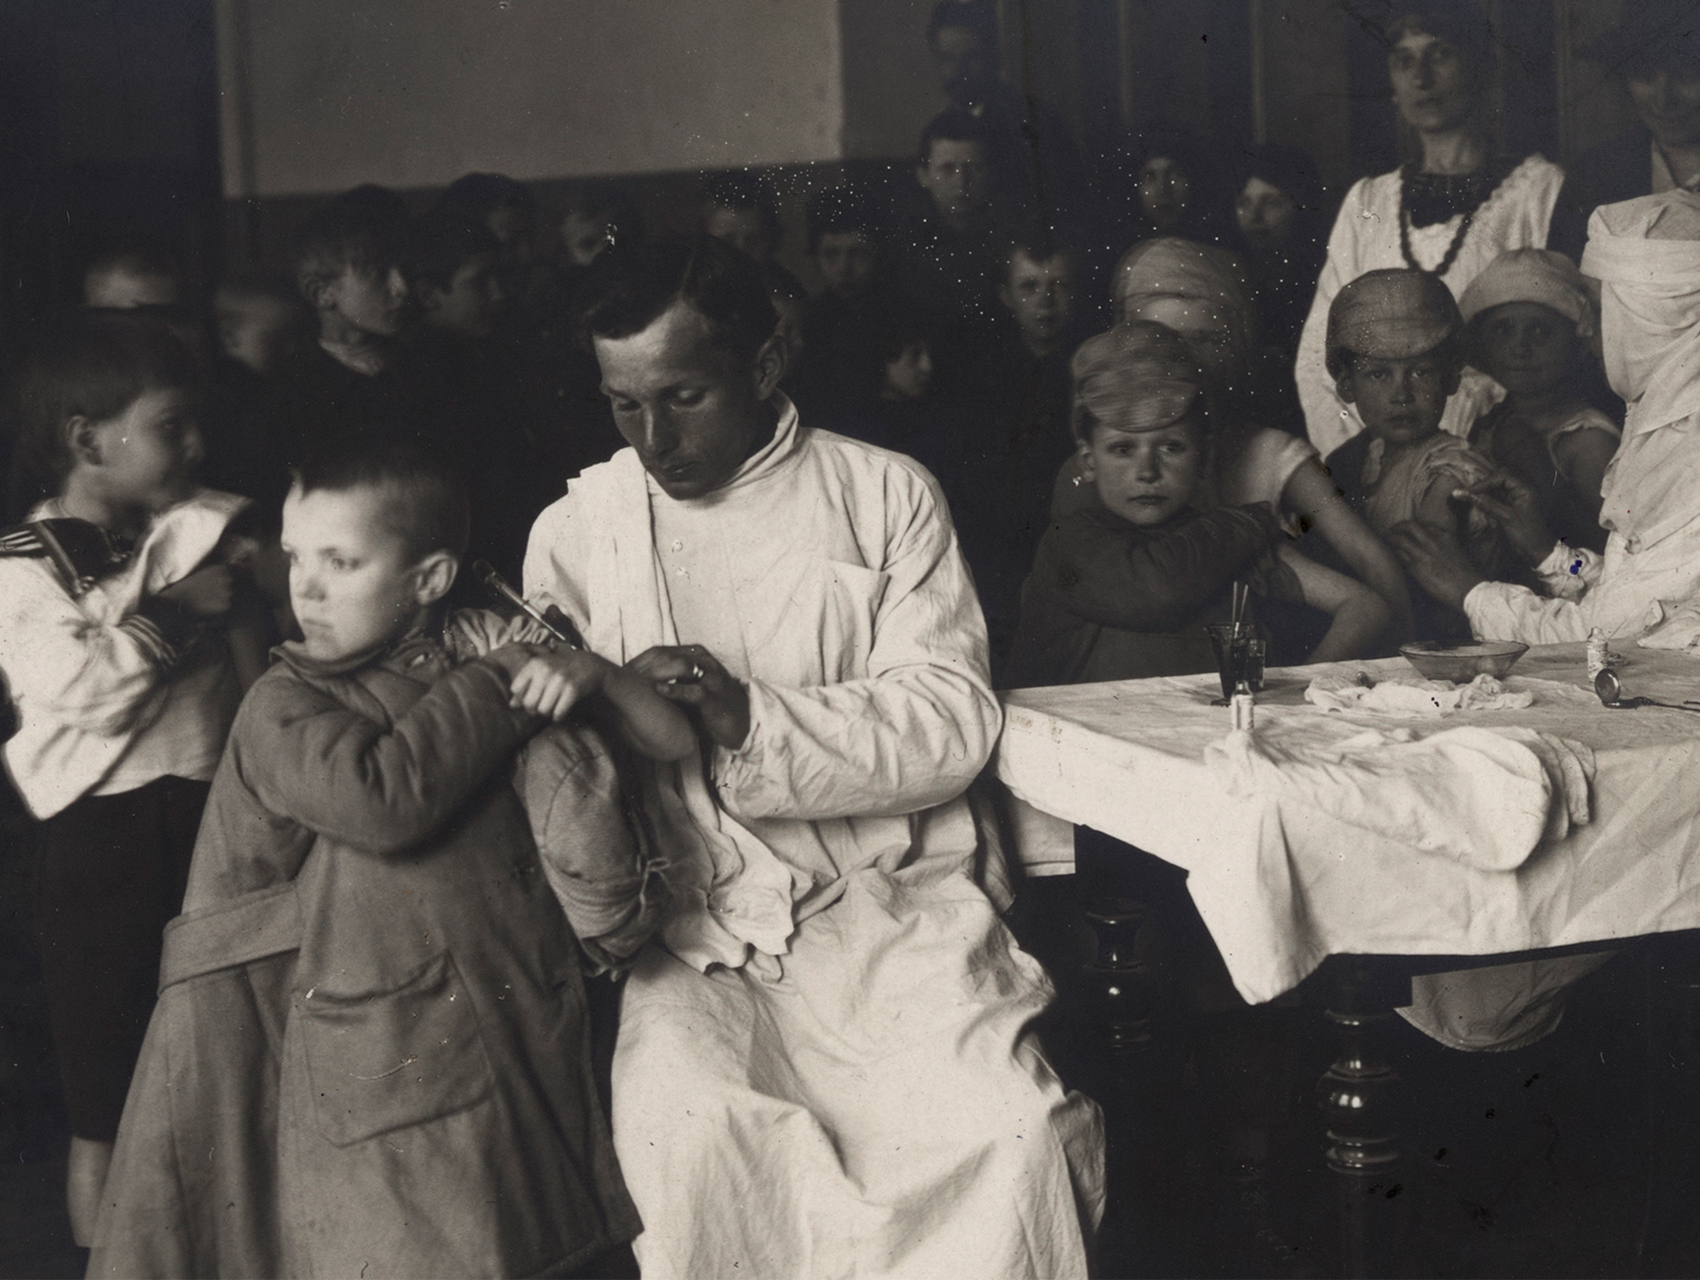 Bread and medicine image of child receiving a vaccination from doctor